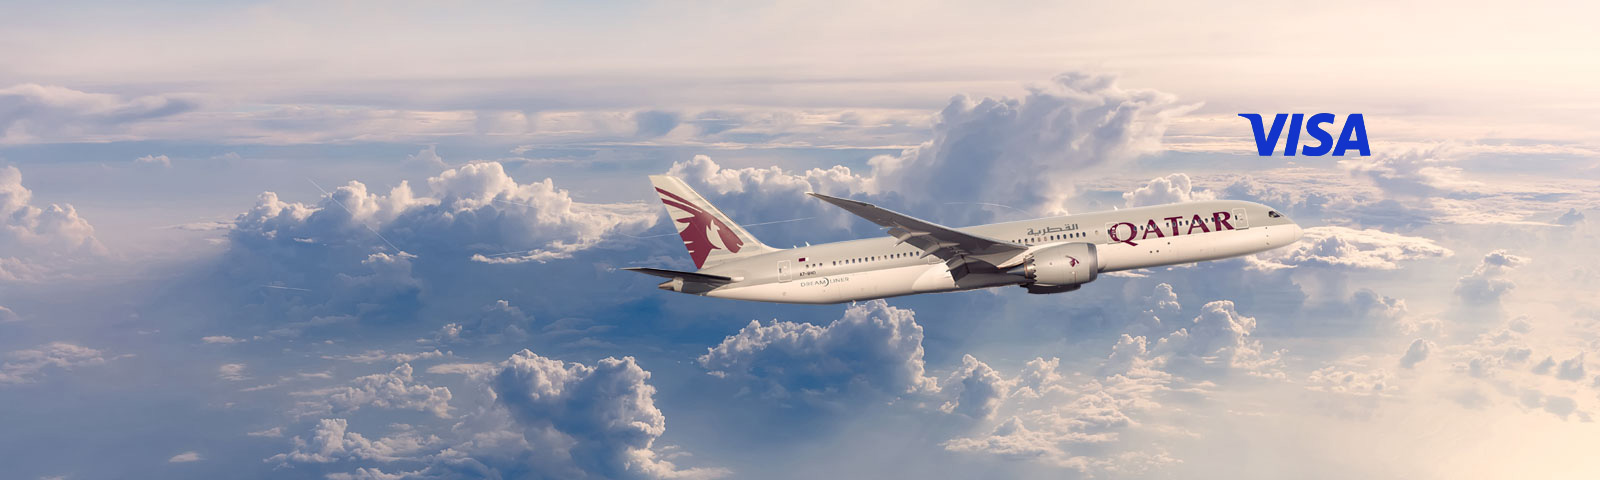 Up to 13% Savings on Qatar Airways from South East Asia with Visa Card - Book by 30 June 2024, Travel by 31 December 2024